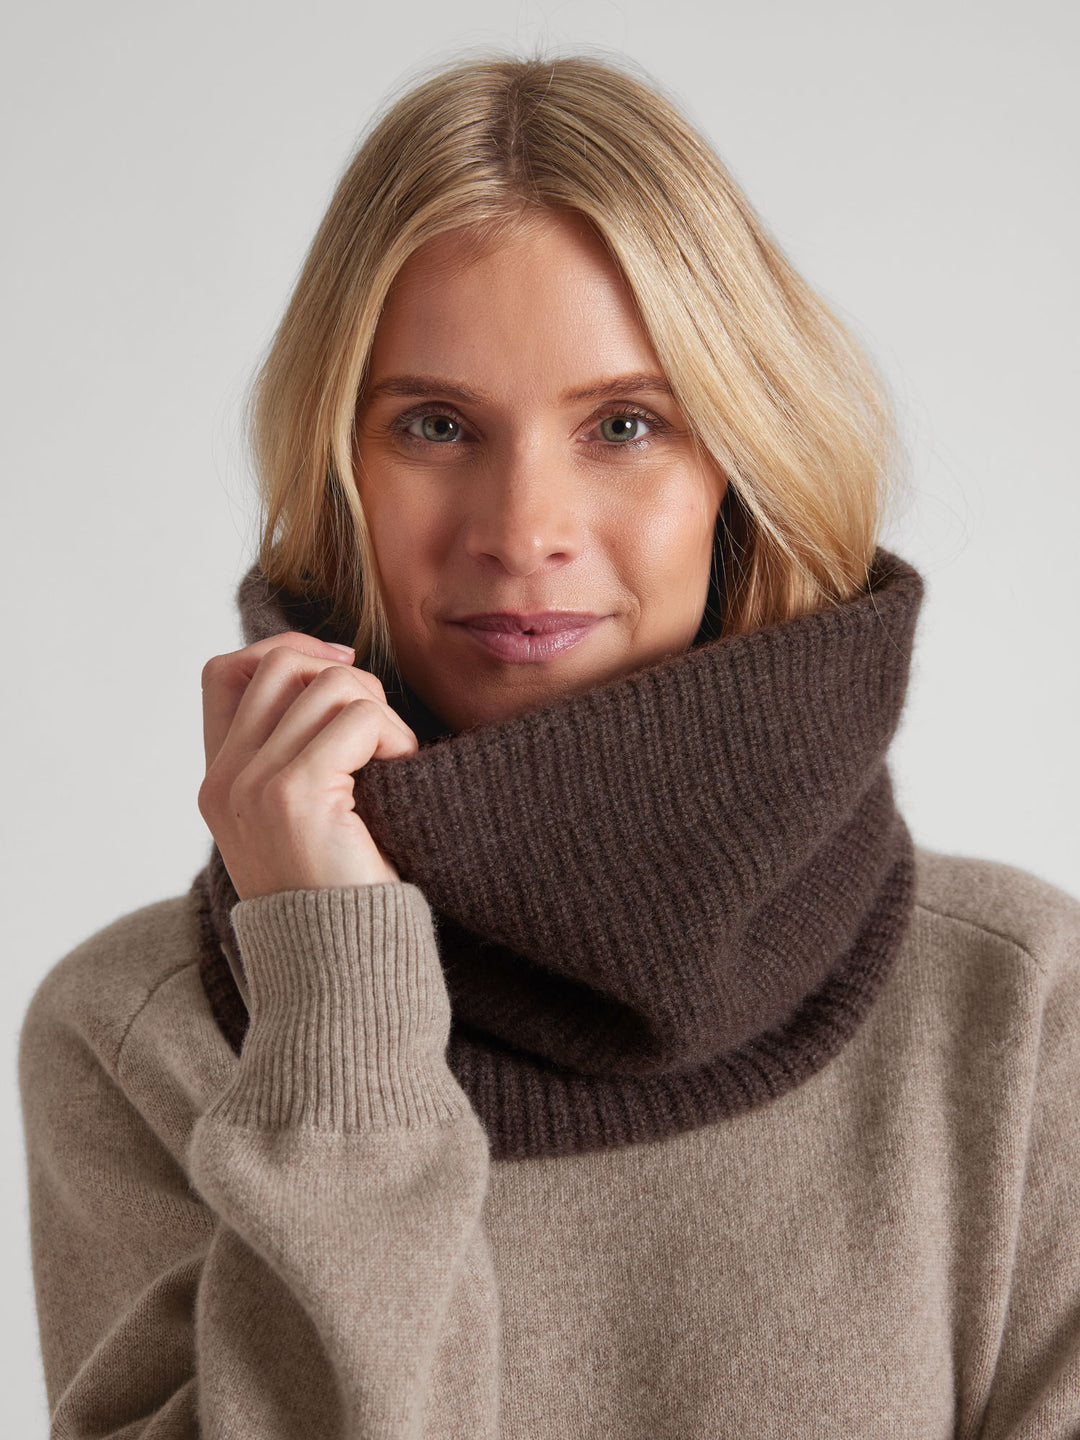 Rib knitted cashmere snood / scarf "Erika" in 100% pure cashmere. Scandinavian design by Kashmina. Color: Dark Brown.